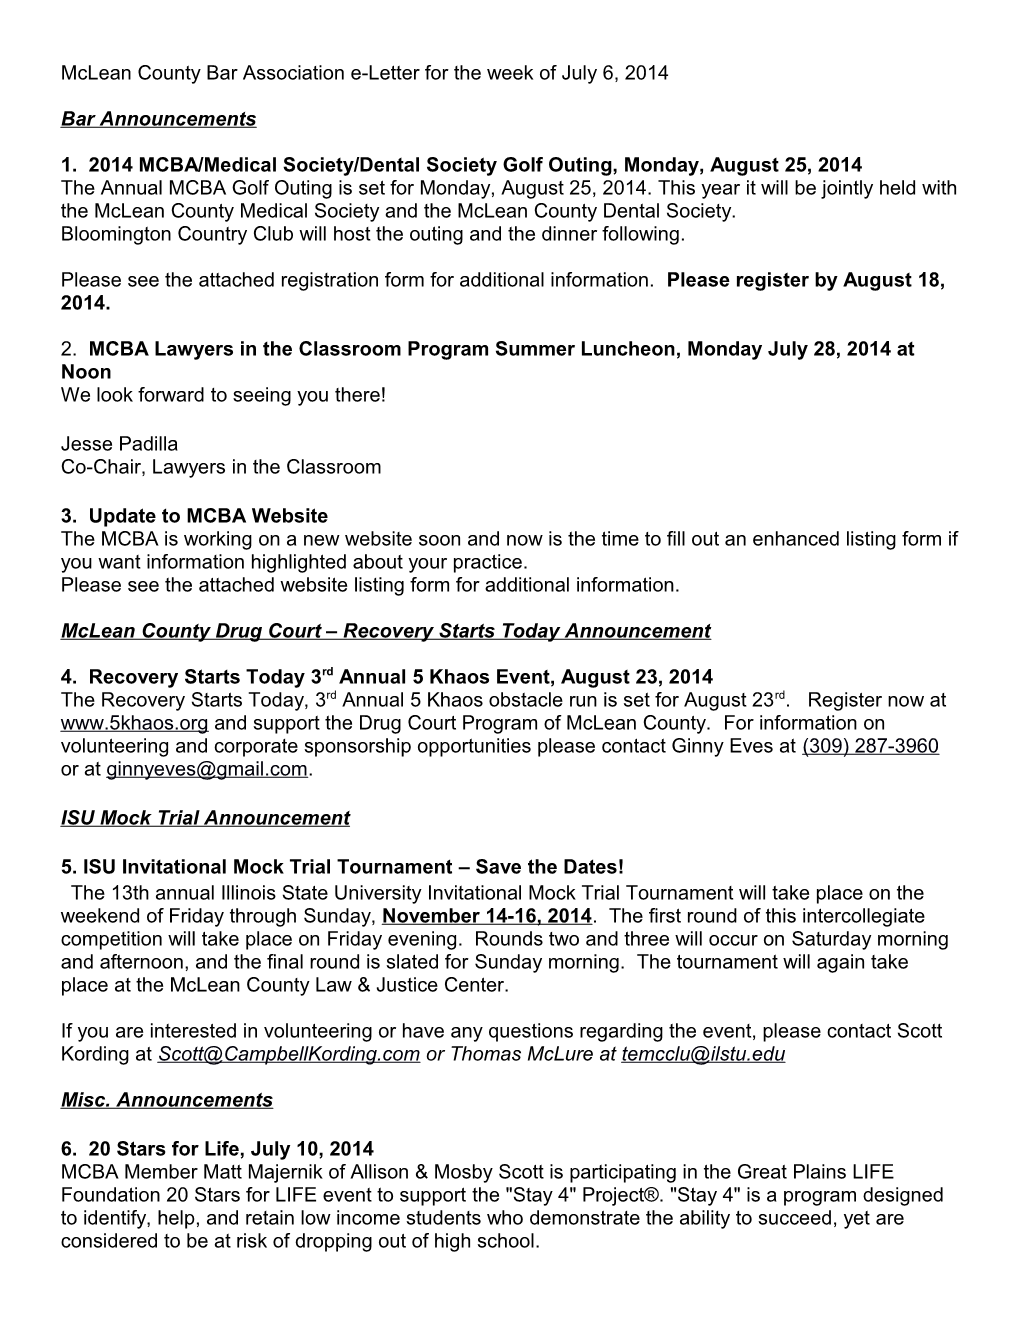 Mclean County Bar Association E-Letter for the Week of July 6, 2014